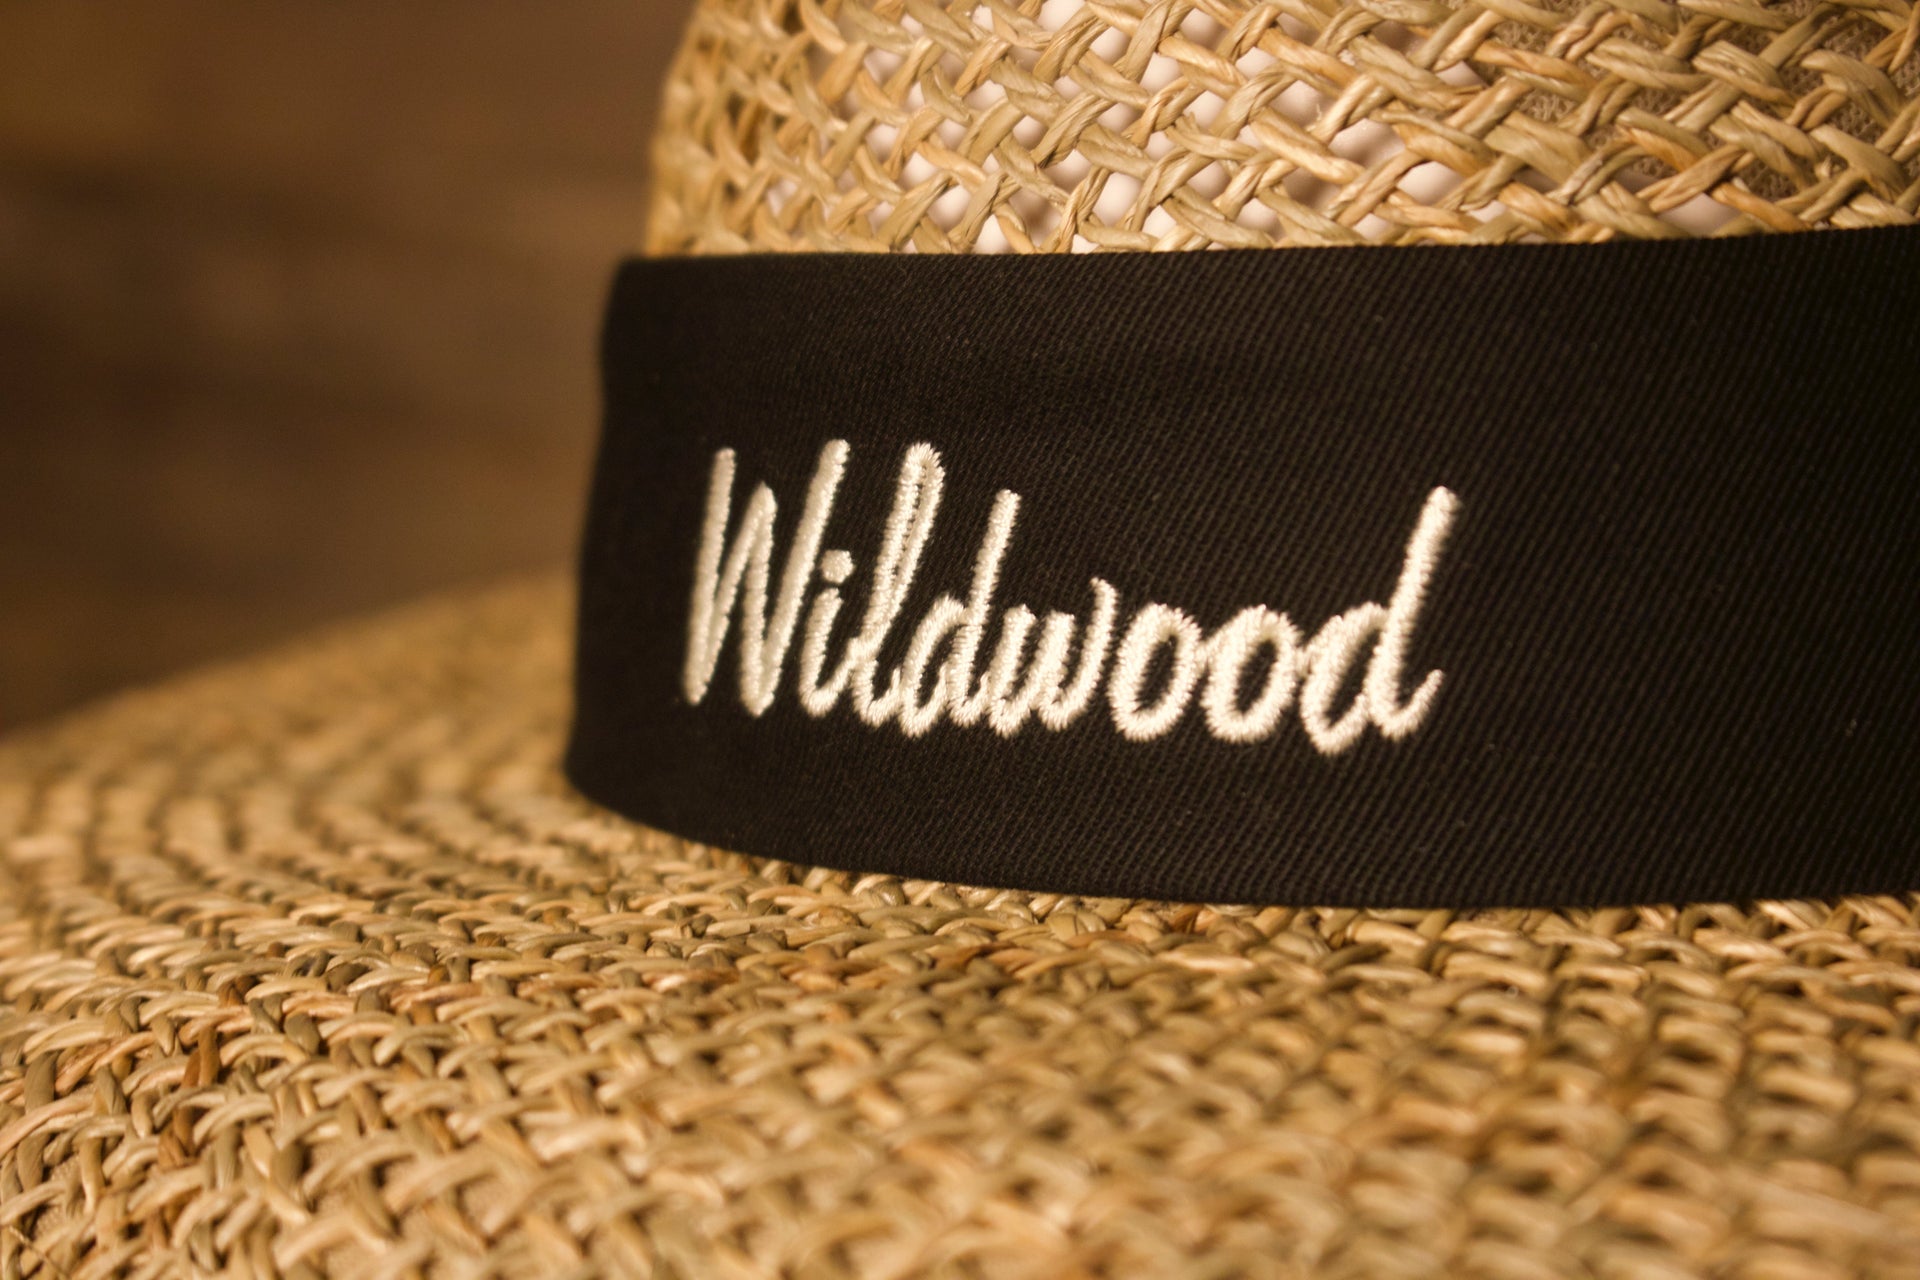 Wildwood Hat | Wildwood New Jersey Stone Colored Straw Hat |  OSFM the town of wildwood is a great place to bring this straw hat